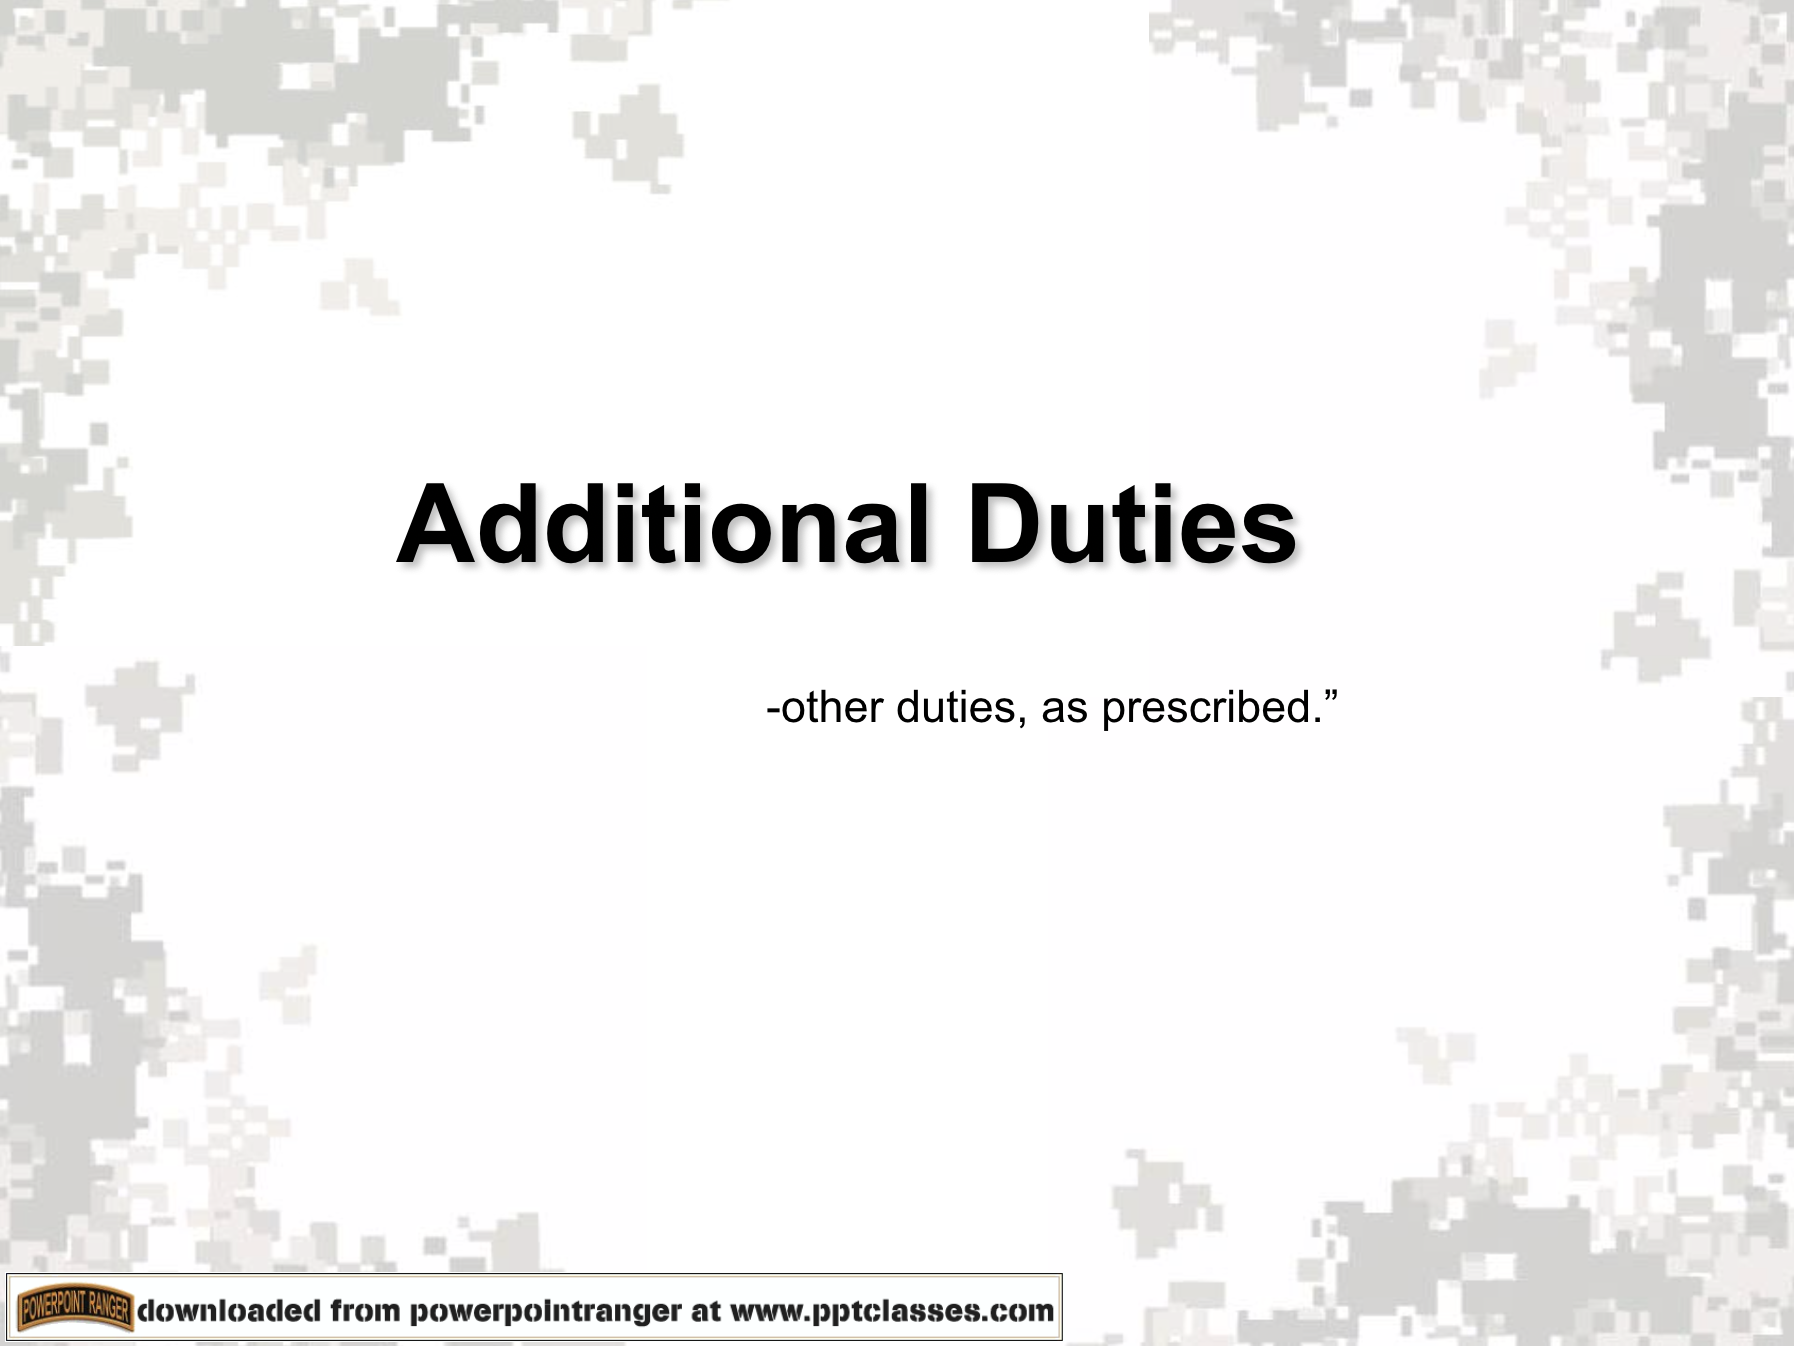 Additional Duties PowerPoint Ranger, Premade Military PPT Classes